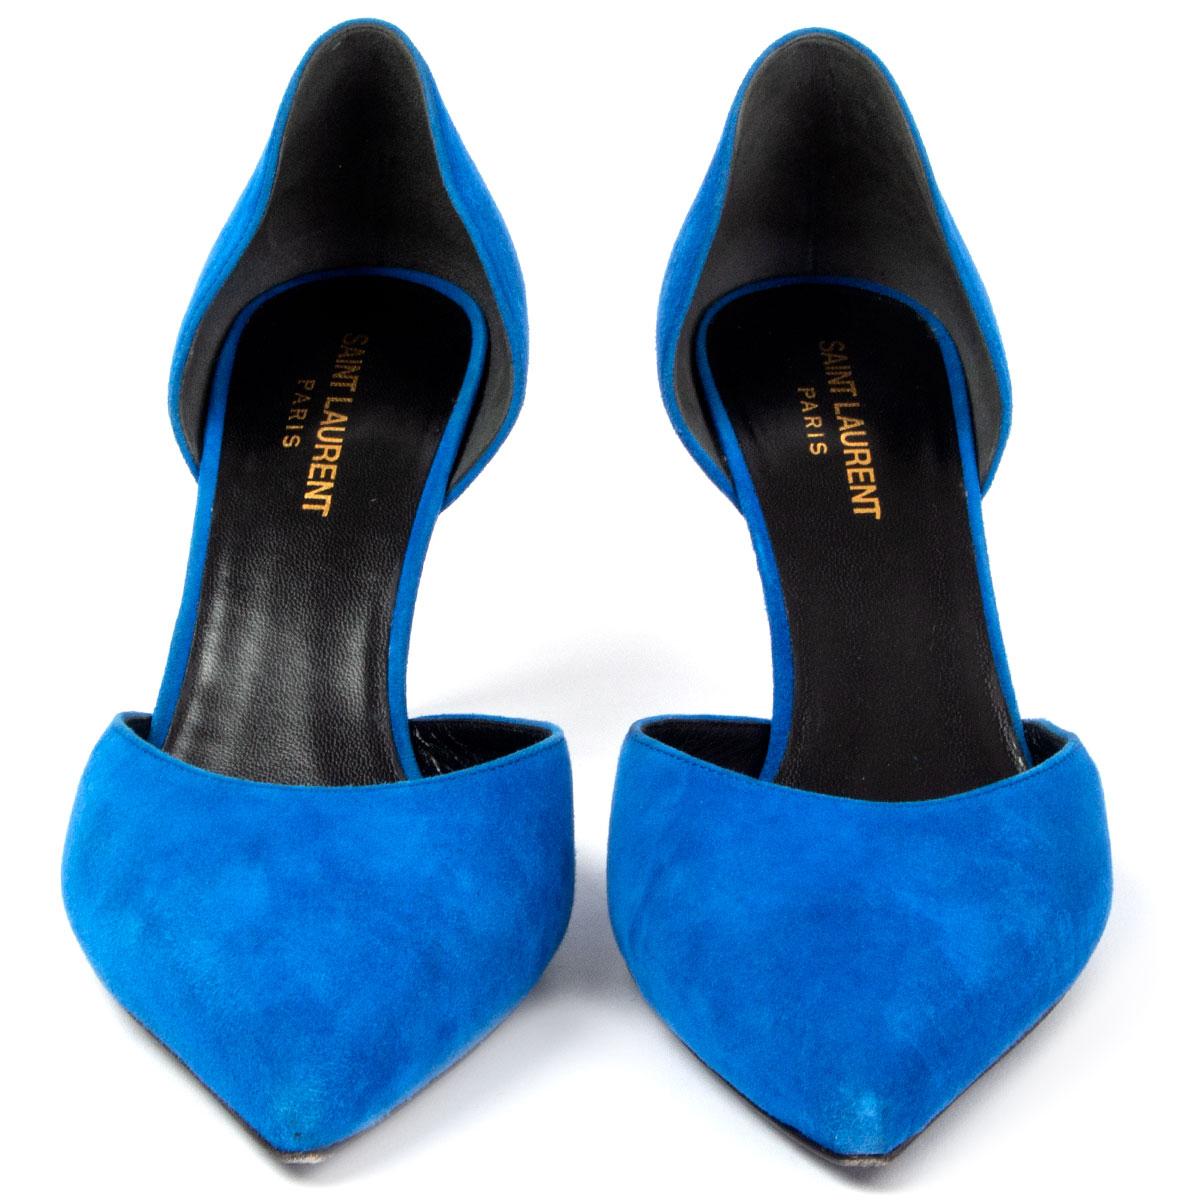 100% authentic Saint Laurent D'Orsay pointed-toe pumps in blue suede. Have been worn and are in excellent condition. Come with dust bag. 

Imprinted Size	40
Shoe Size	40
Inside Sole	26cm (10.1in)
Width	8cm (3.1in)
Heel	8cm (3.1in)

All our listings